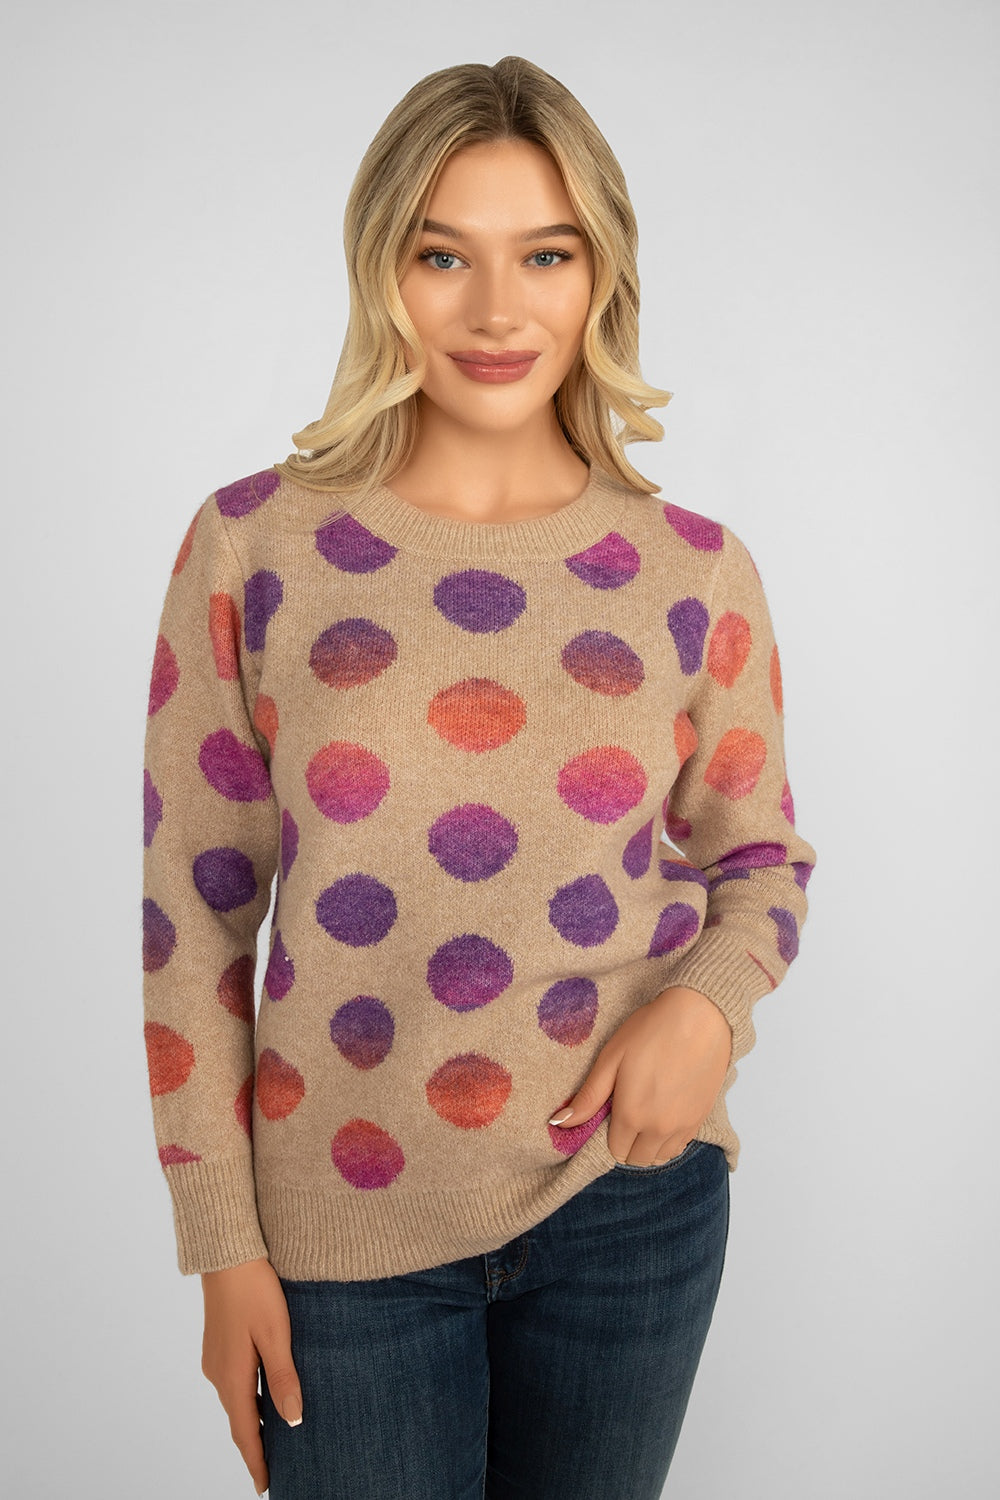 Women's Clothing EVIDENCE (91717) Polka Dot Sweater in MULTICIRCLES